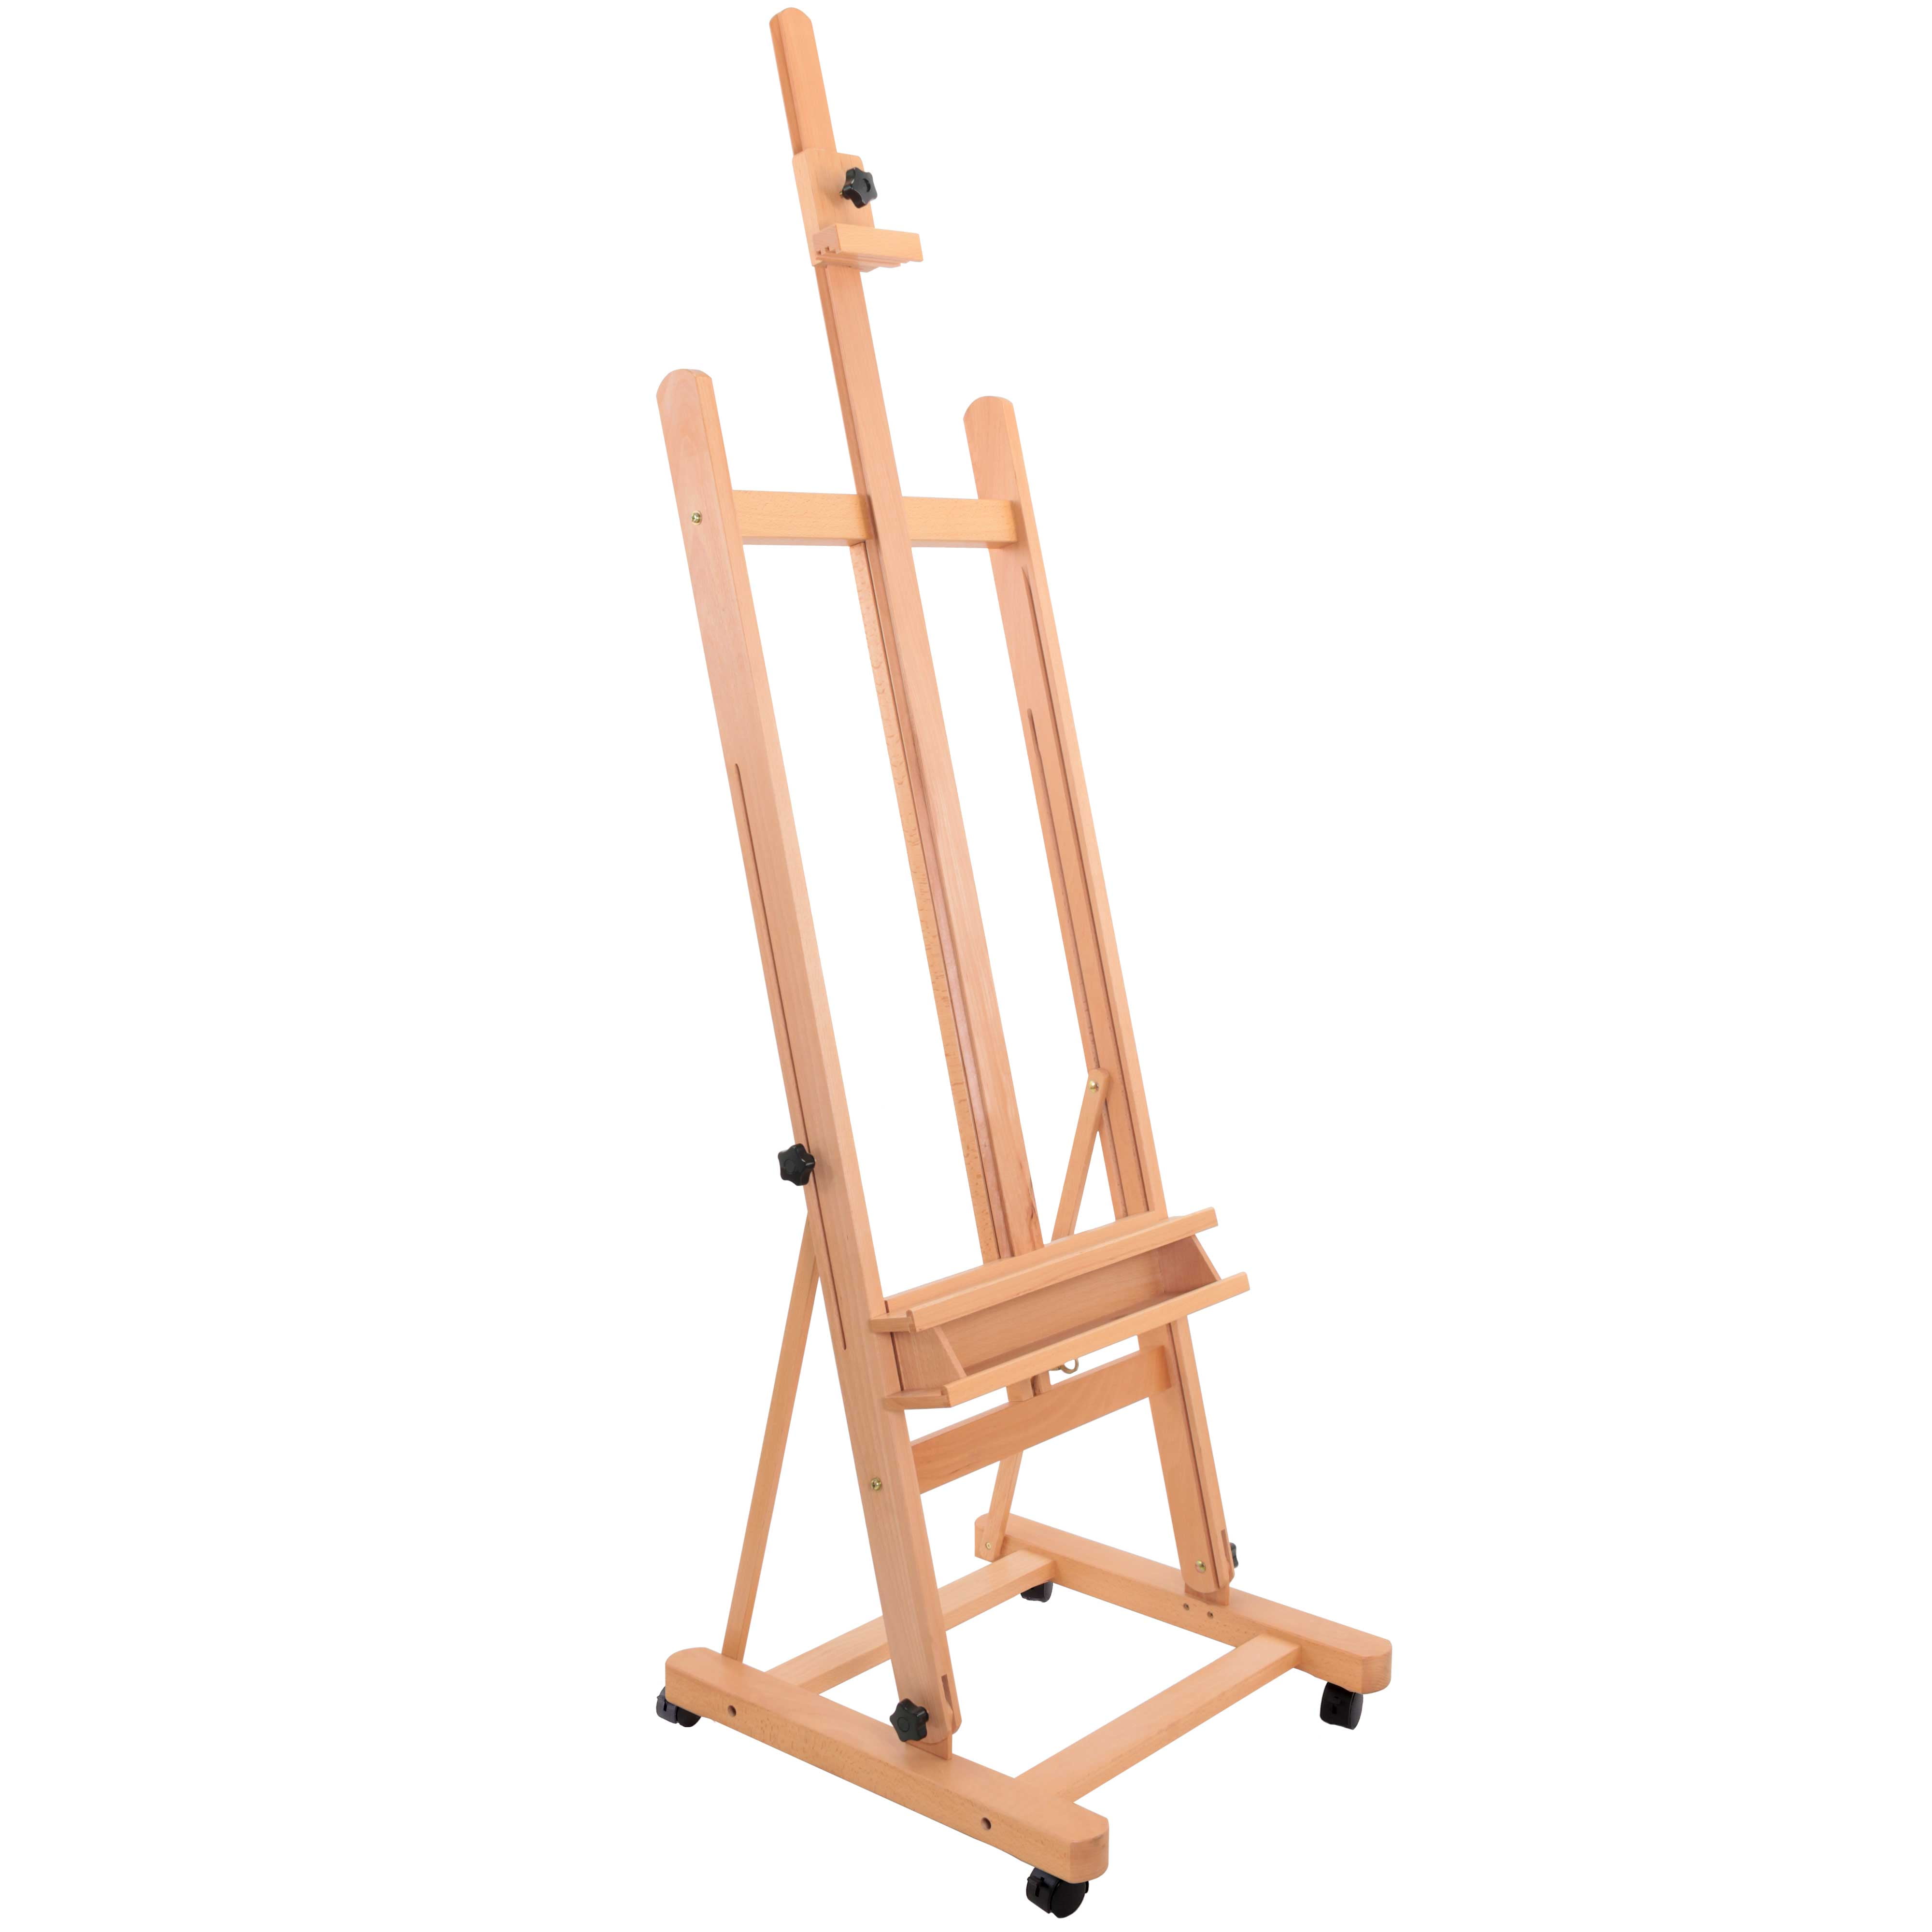 Large Wooden H-Frame Studio Easel with Artist Storage Drawer and Shelf -  Adjusts to 75 High, Easel - Foods Co.